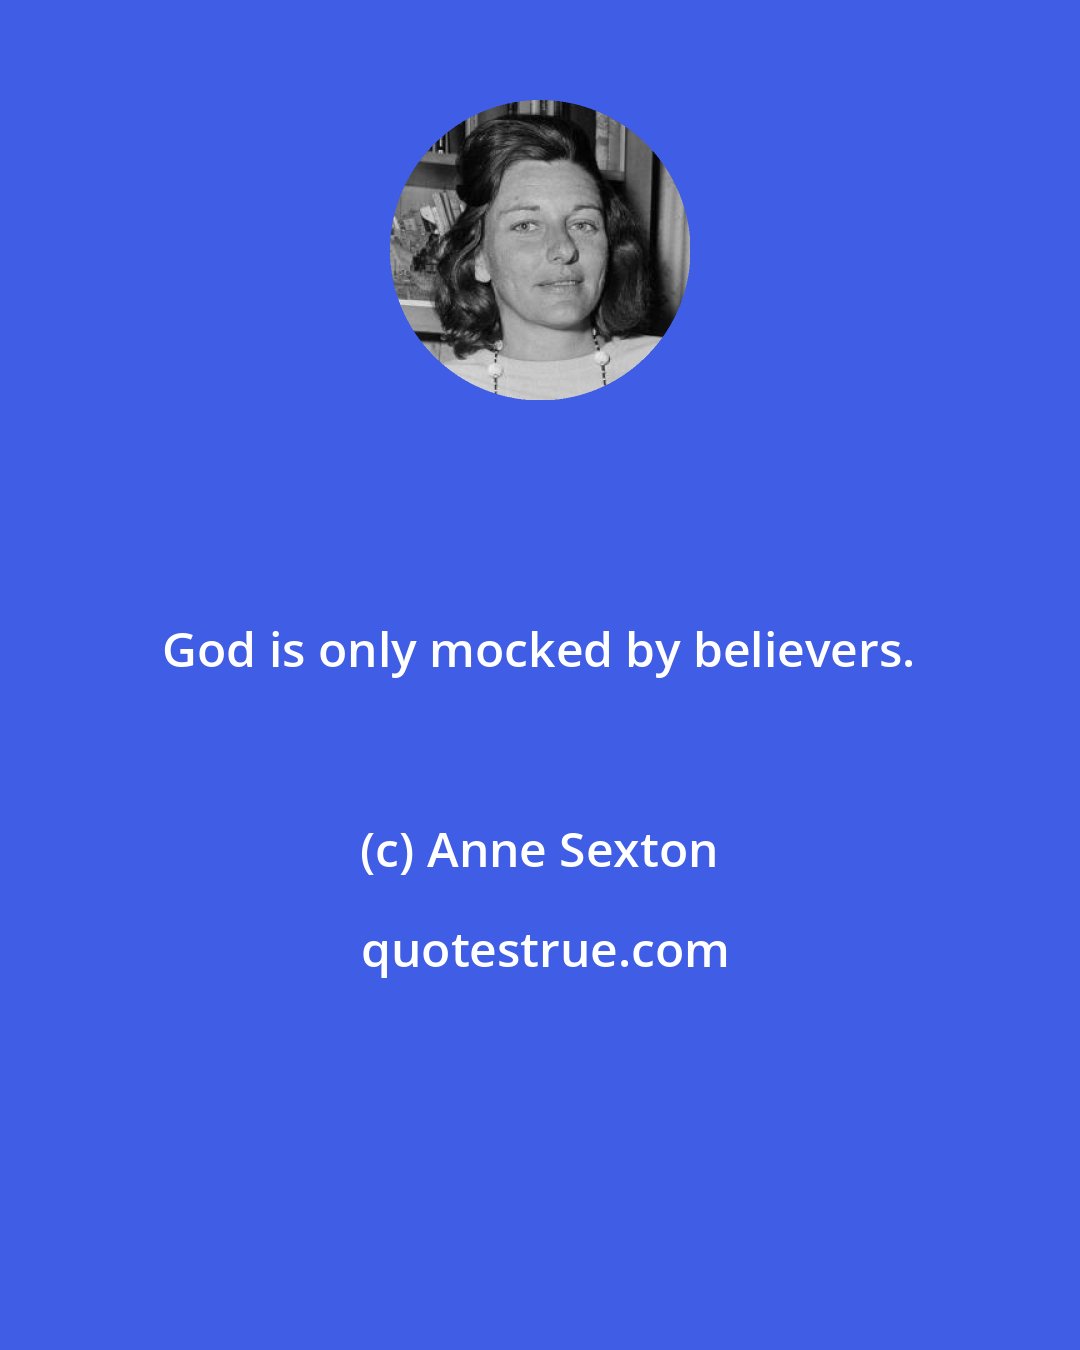 Anne Sexton: God is only mocked by believers.